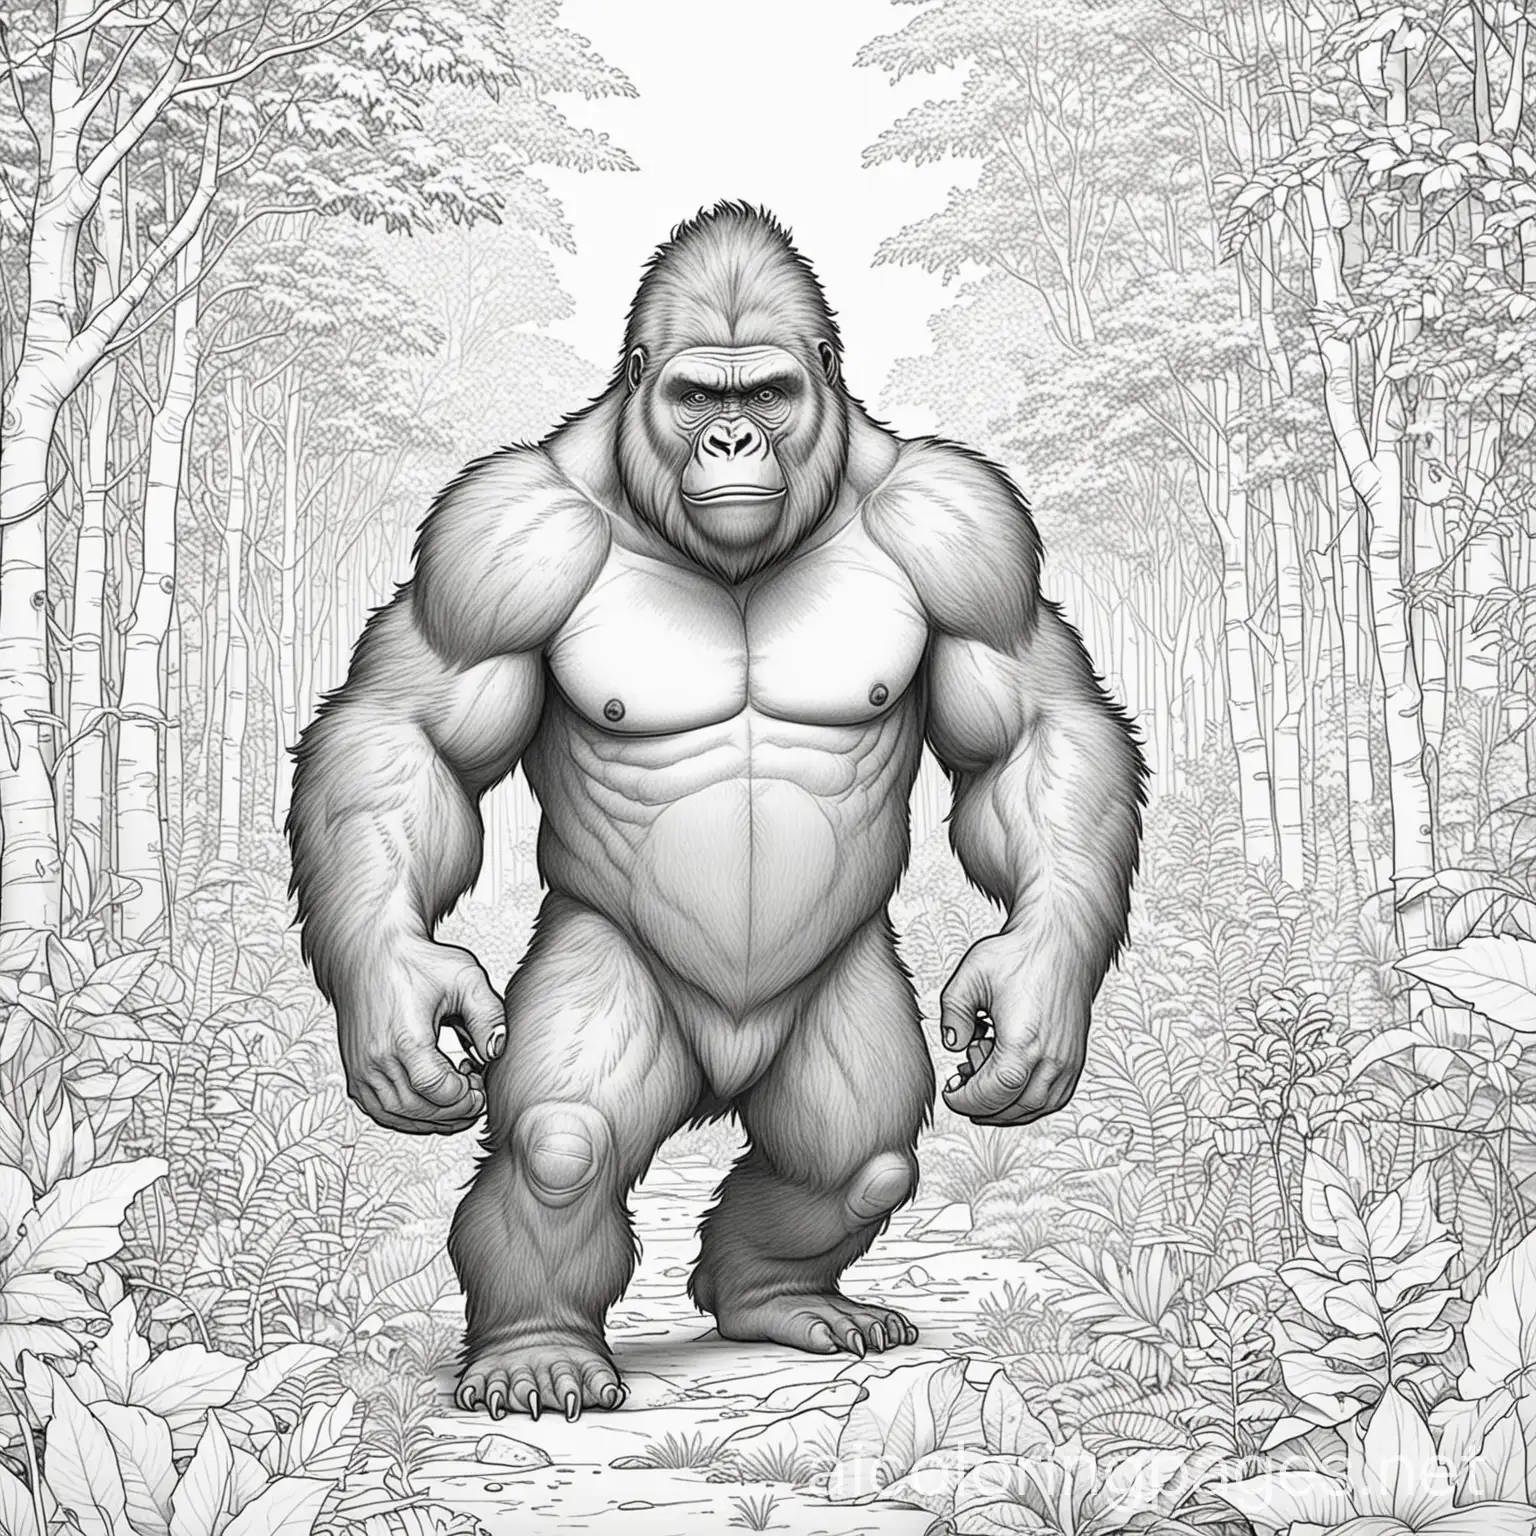 colouring book forest gorilla with action moment, Coloring Page, black and white, line art, white background, Simplicity, Ample White Space. The background of the coloring page is plain white to make it easy for young children to color within the lines. The outlines of all the subjects are easy to distinguish, making it simple for kids to color without too much difficulty, Coloring Page, black and white, line art, white background, Simplicity, Ample White Space. The background of the coloring page is plain white to make it easy for young children to color within the lines. The outlines of all the subjects are easy to distinguish, making it simple for kids to color without too much difficulty